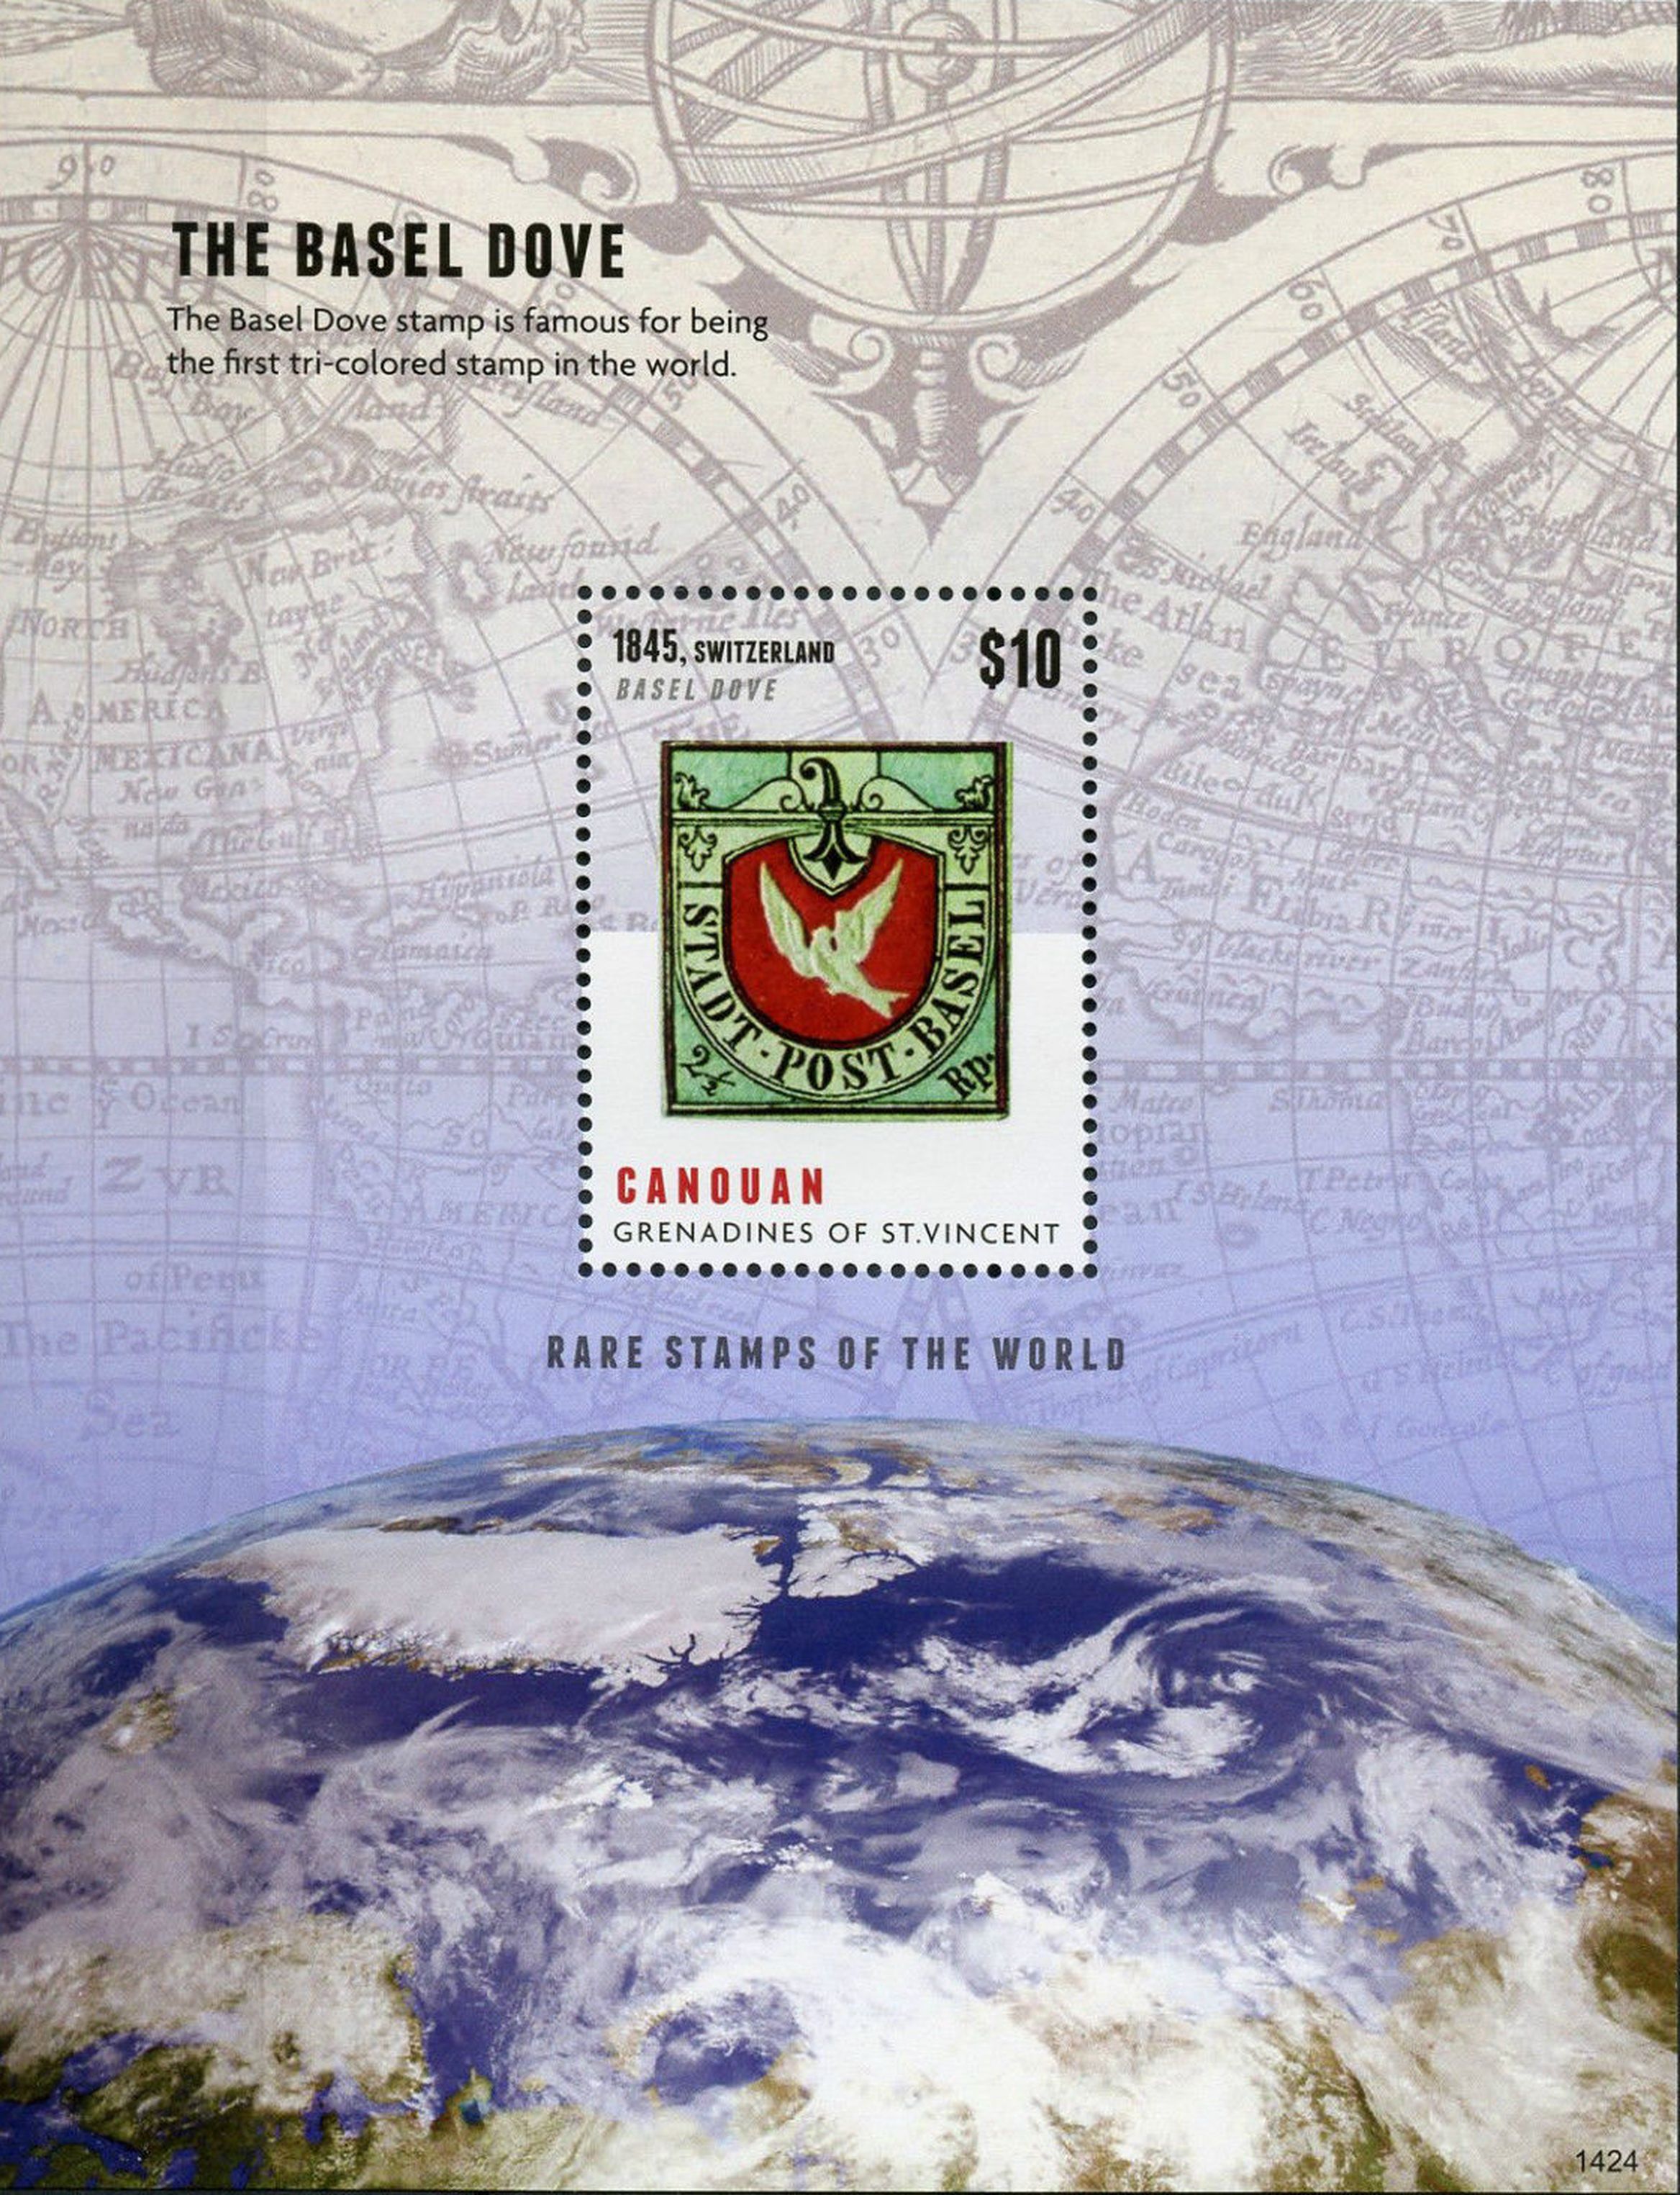 http://www.stampsonstamps.org/Rammy/China/China_image028.jpg